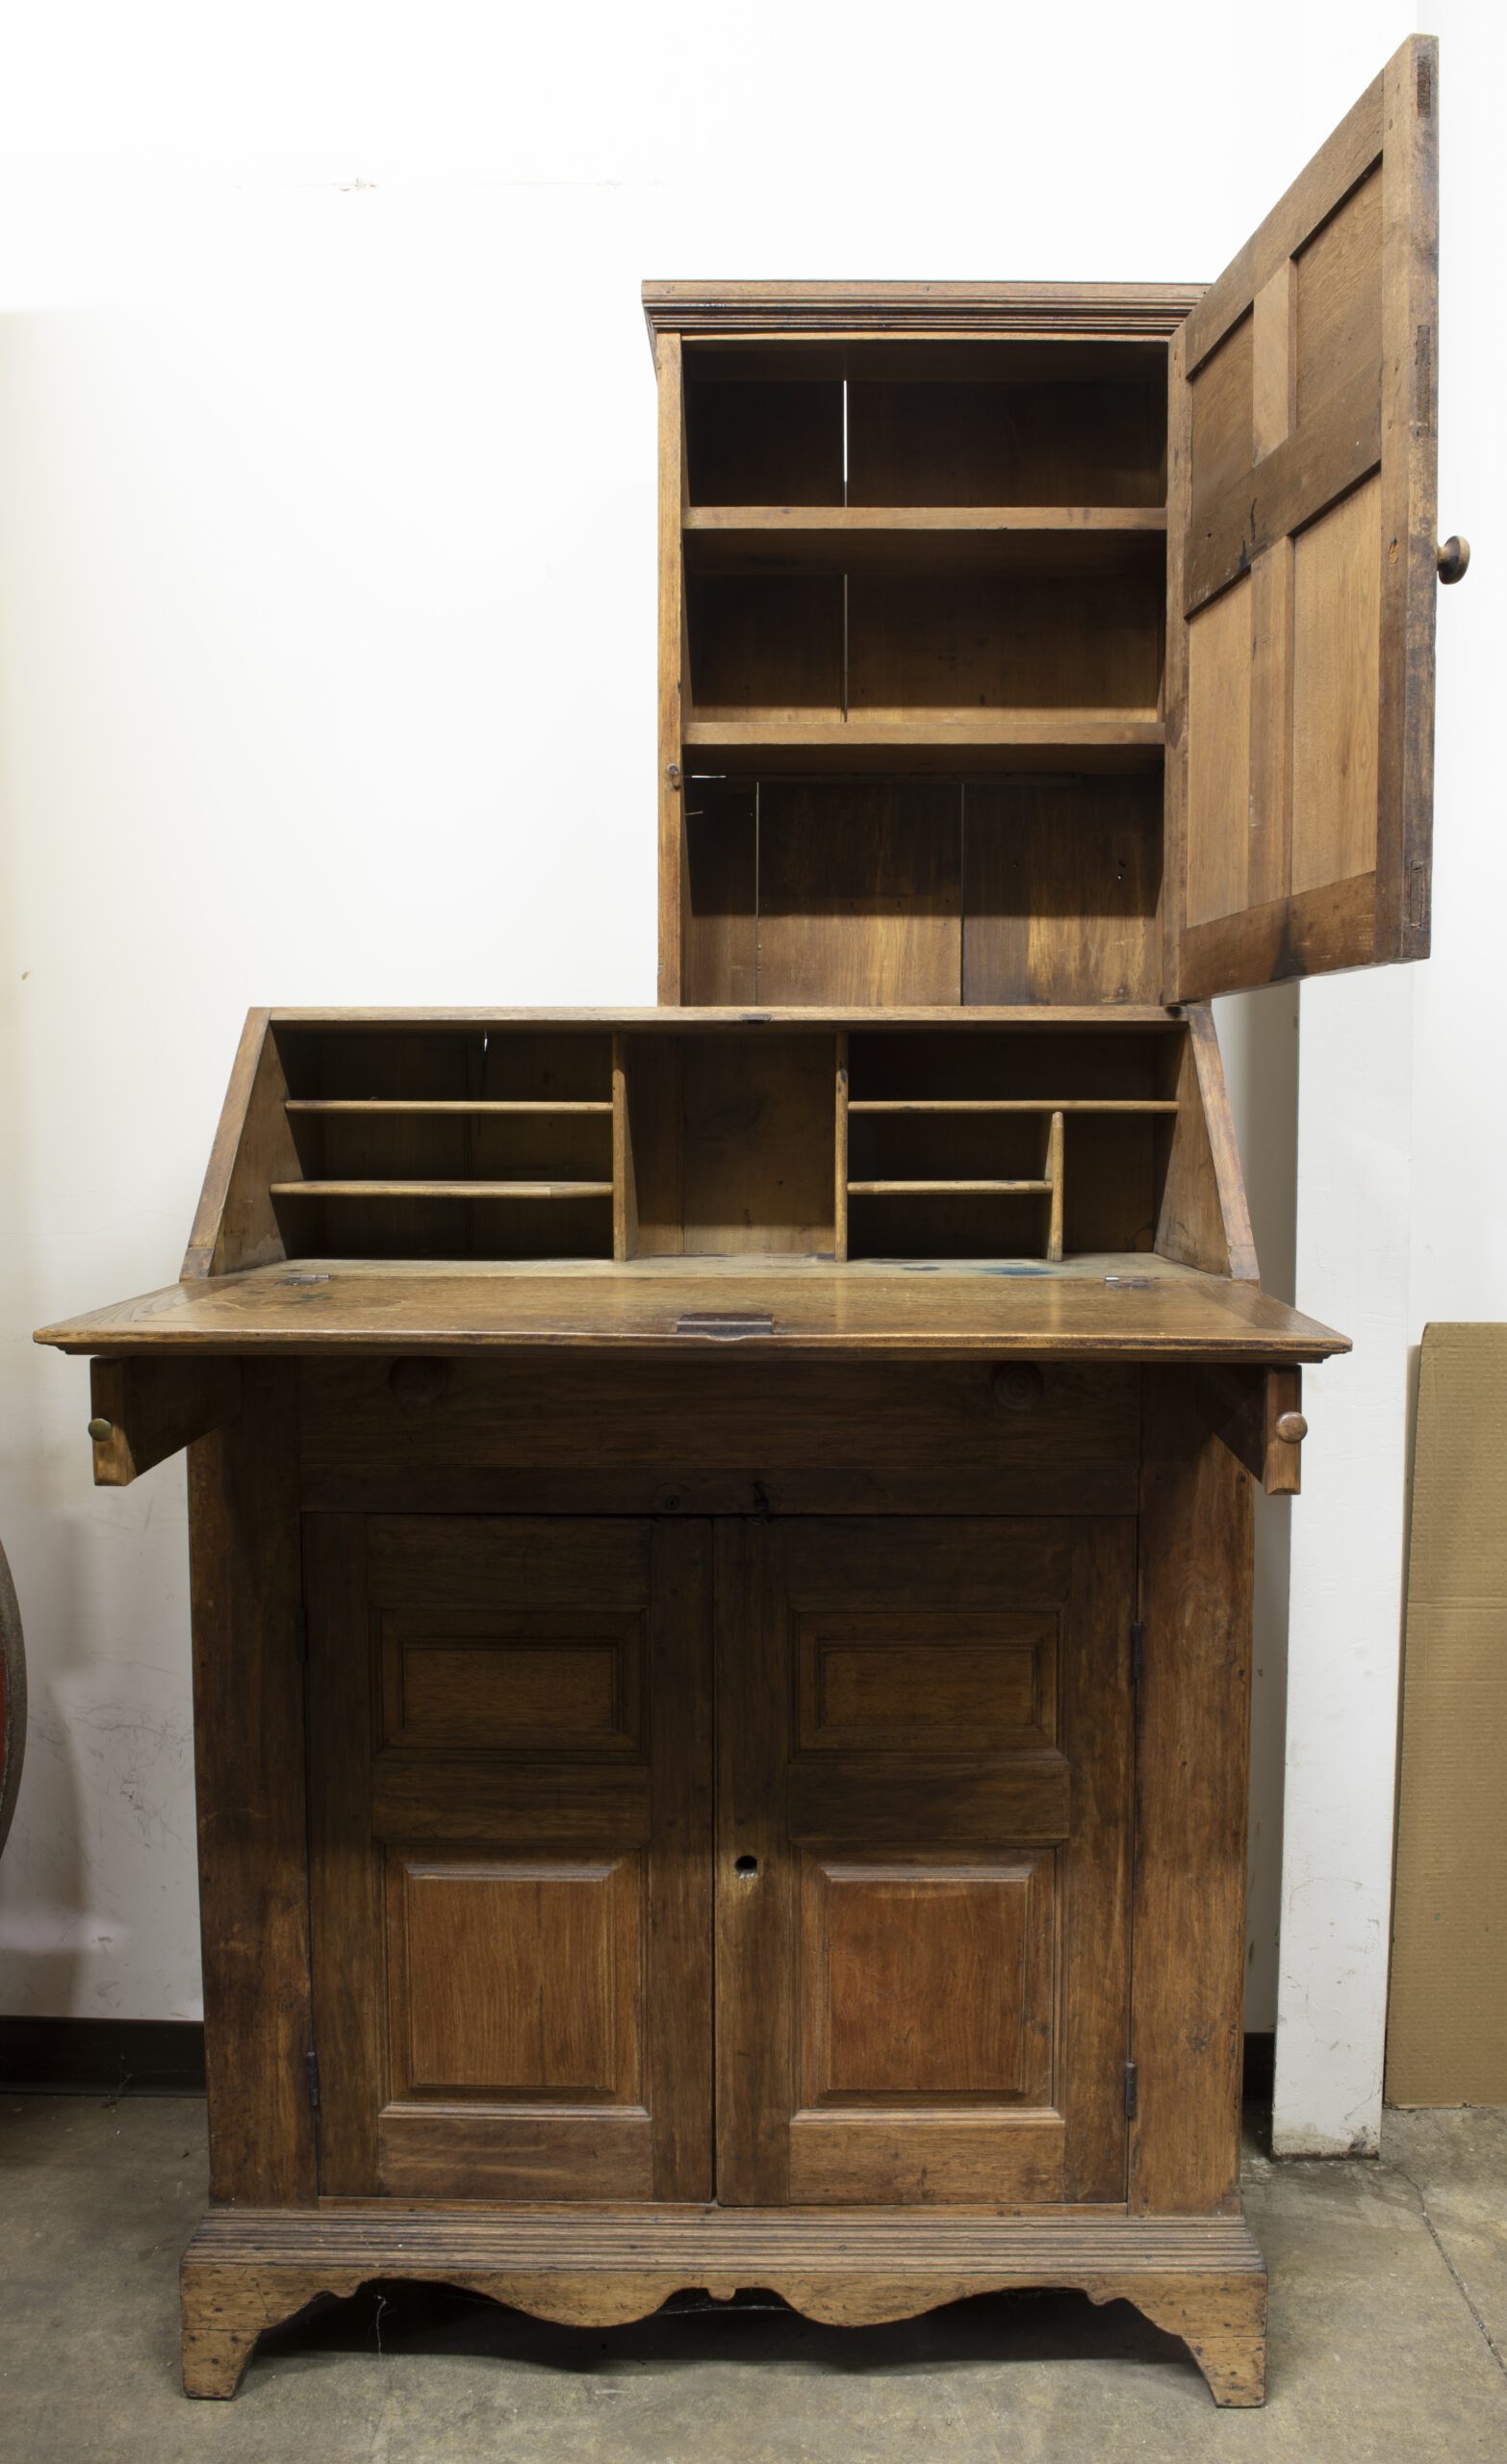 Photo of a wooden drop-front desk with a half cabinet on the top right. The cabinet door and drop front are open.